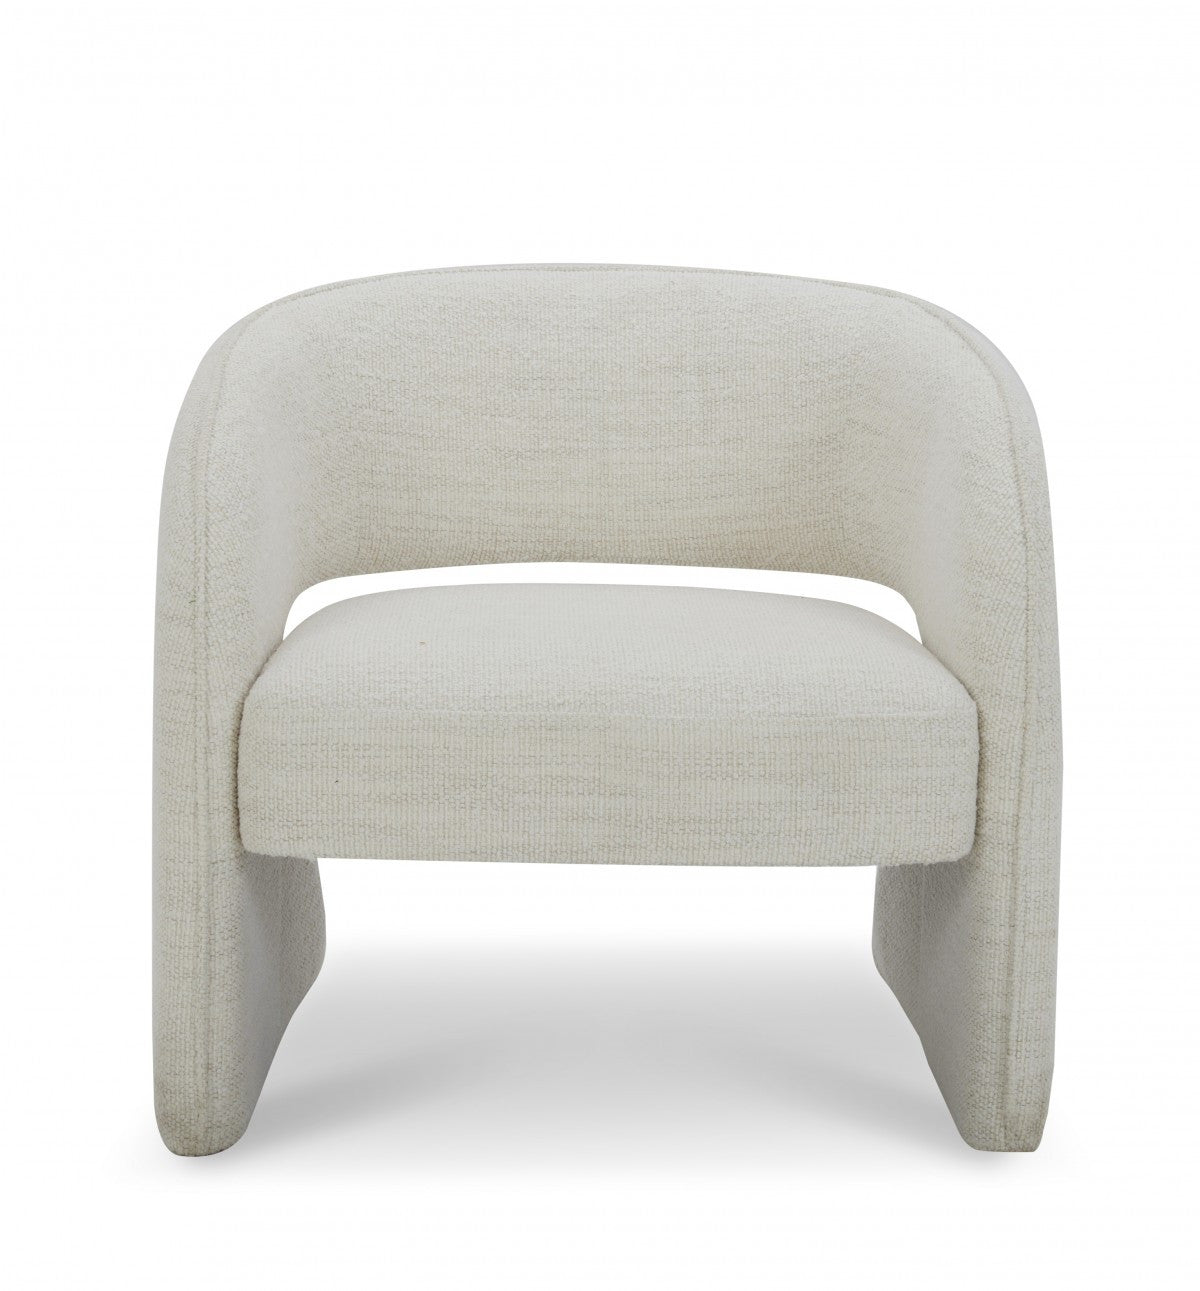 31" Cream Textural Solid Color Arm Chair